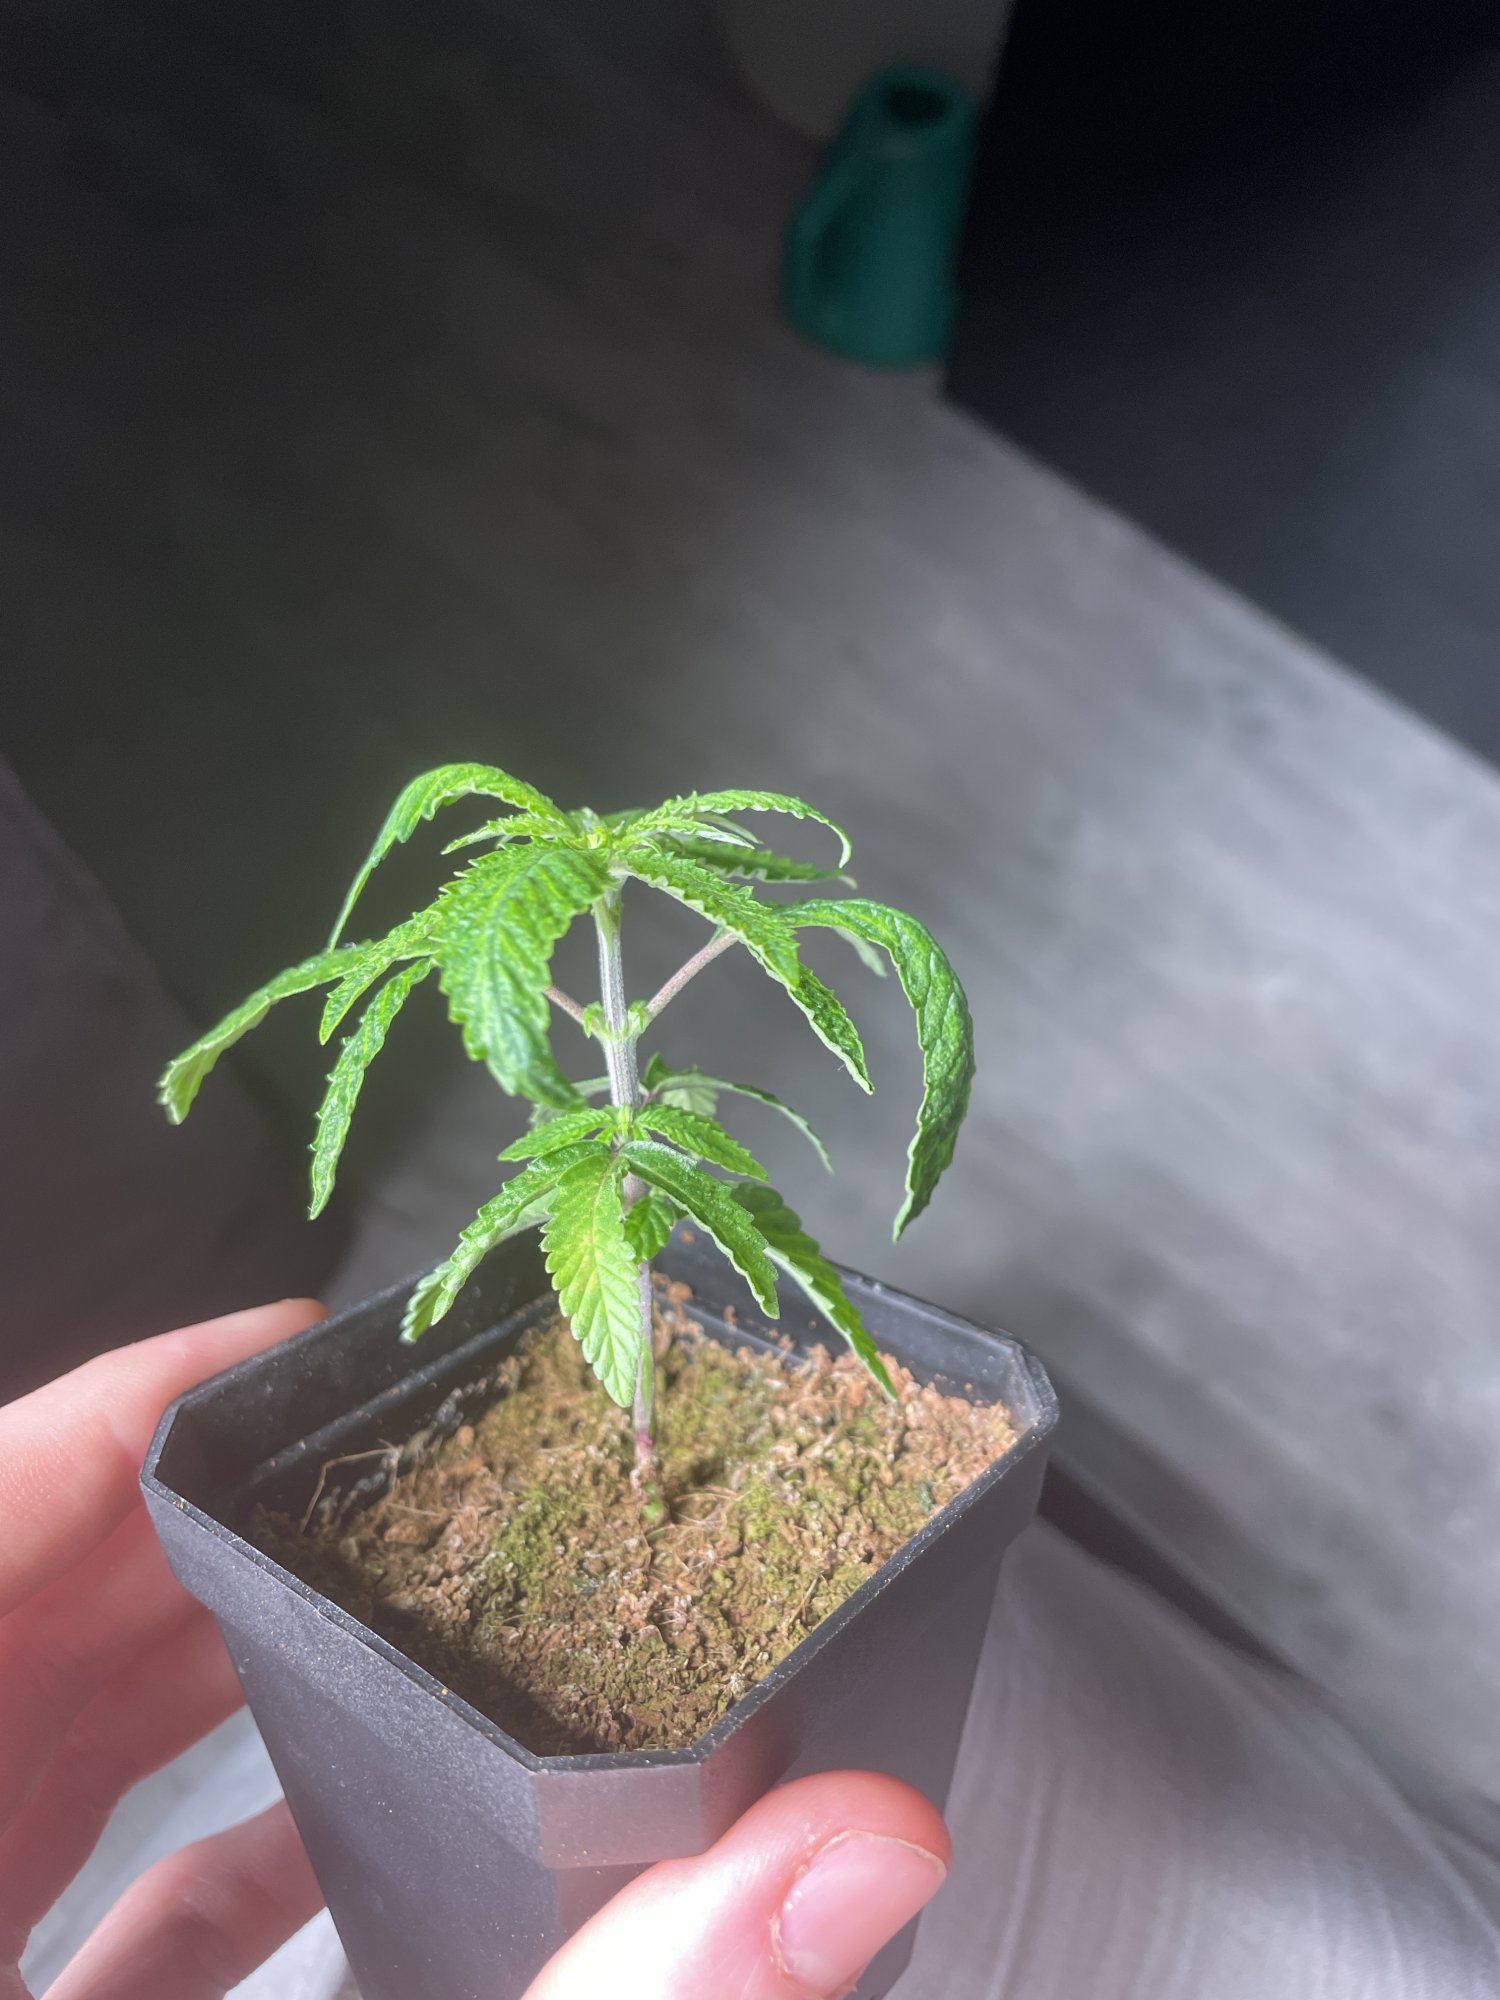 Problems with slow growth please help 4